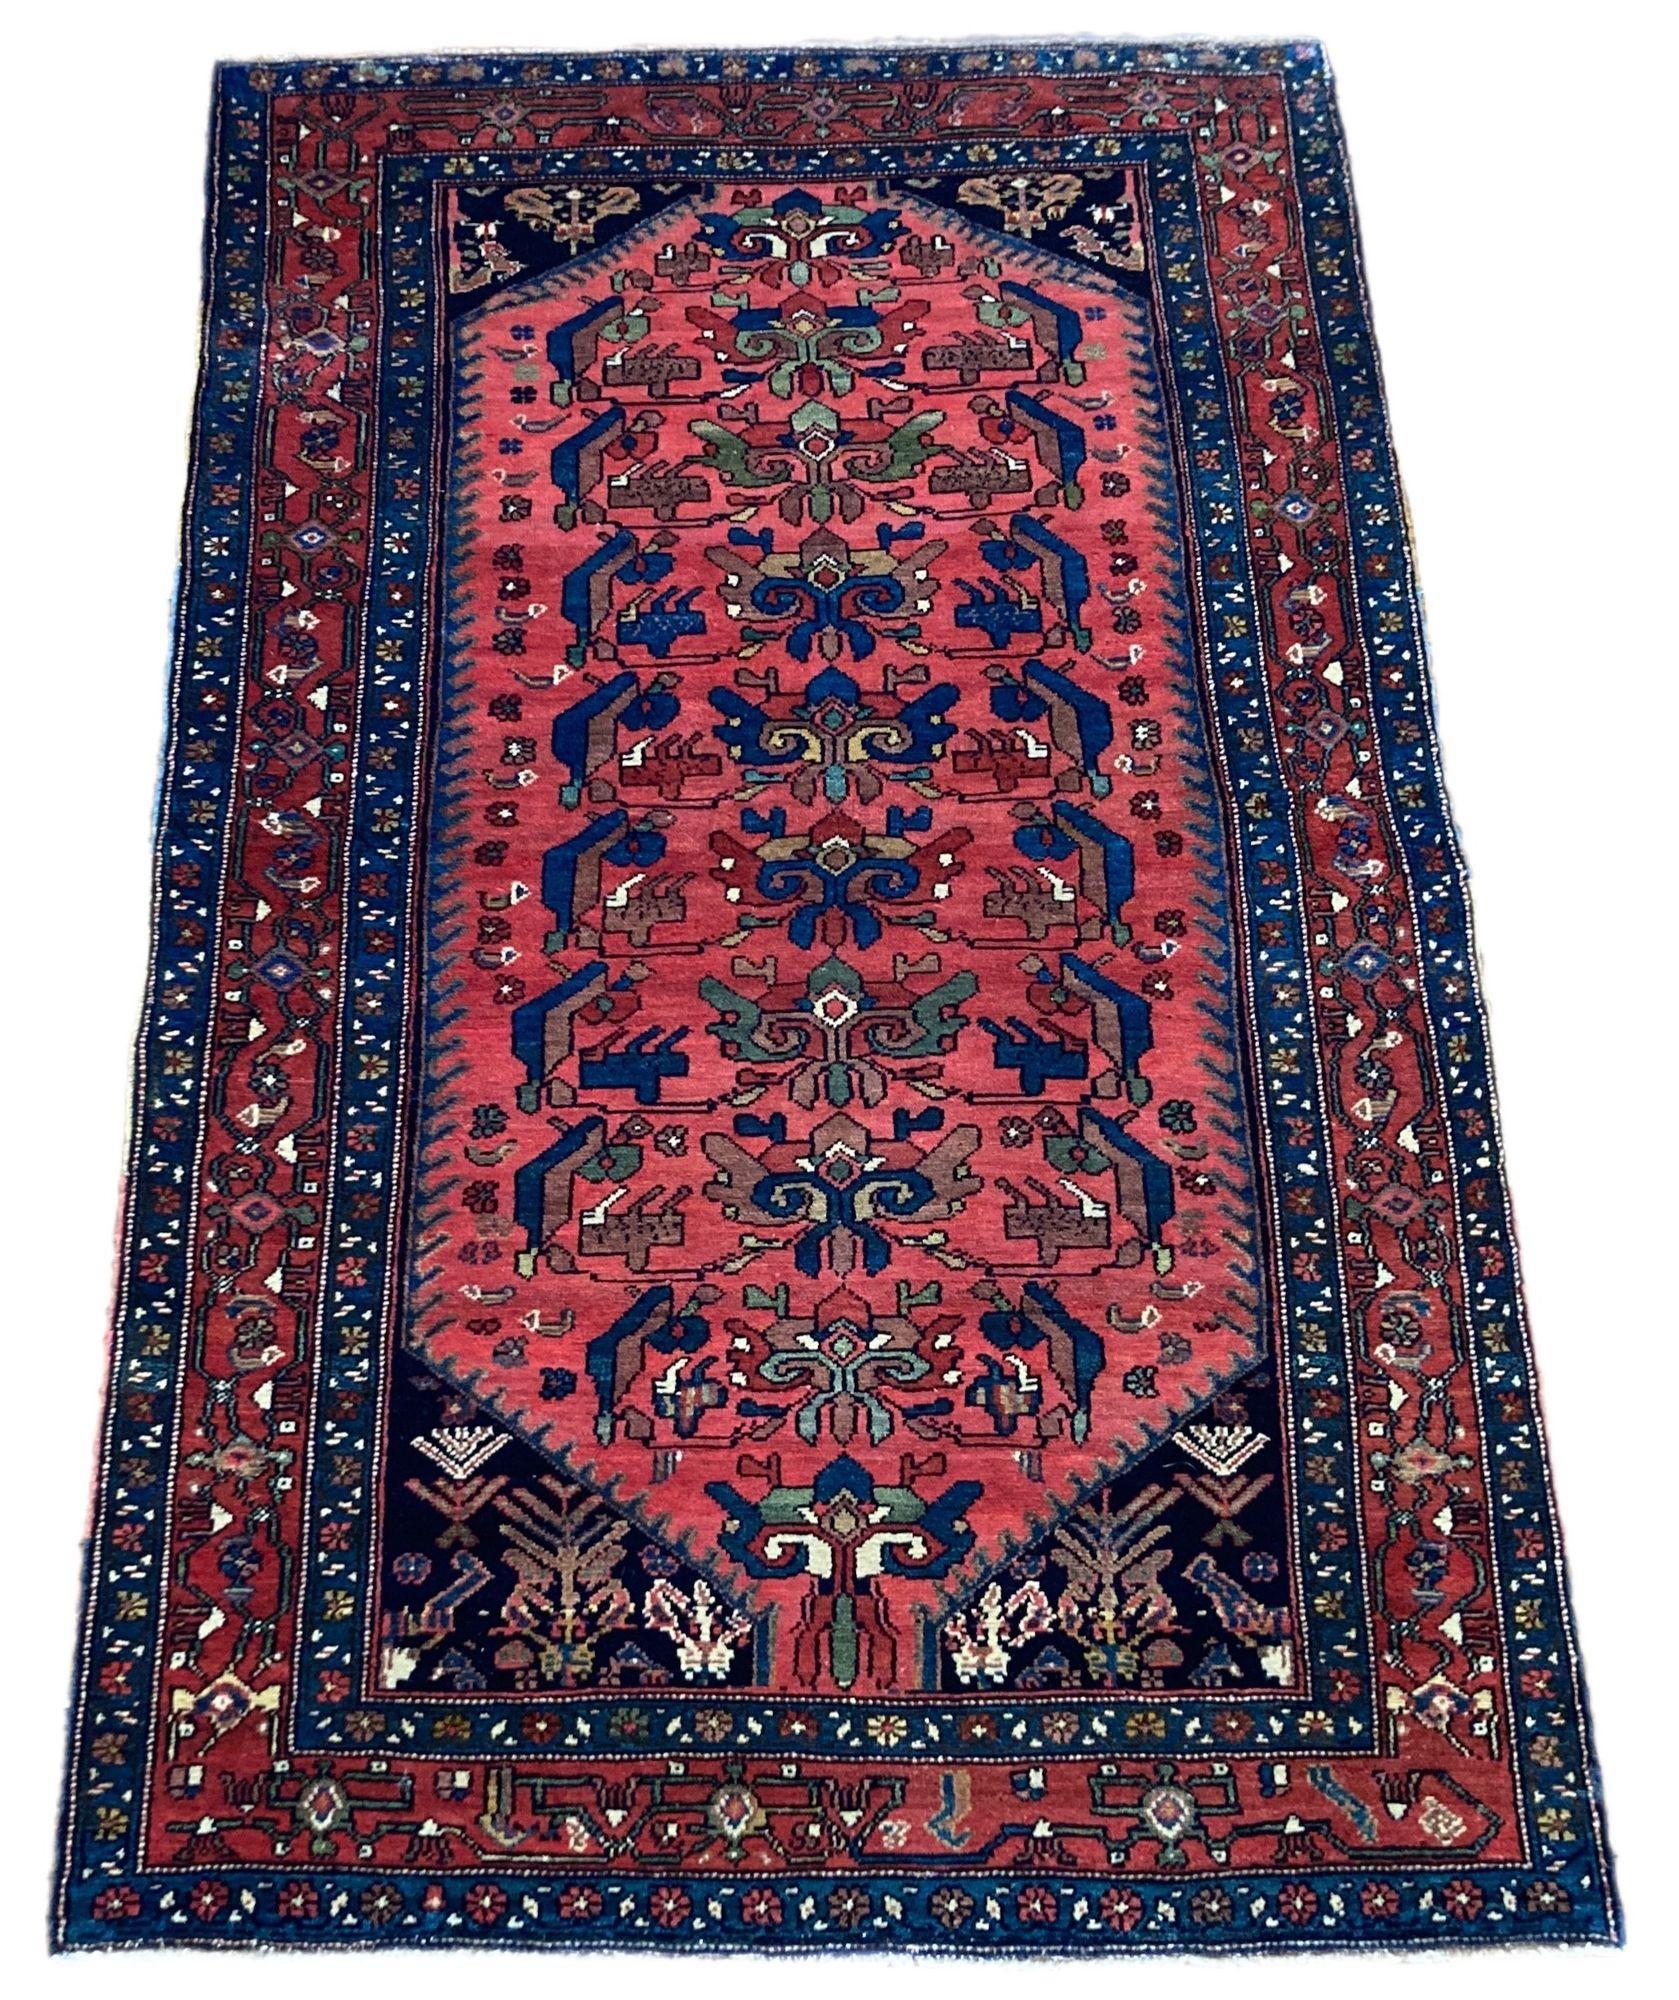 A beautiful antique Hamadan rug, hand woven circa 1920 with an all over design on a terracotta field and similar border. Wonderful secondary colours of blues and greens and a very decorative rug.
Size: 1.97m x 1.22m (6ft 6in x 4ft)
This rug is in